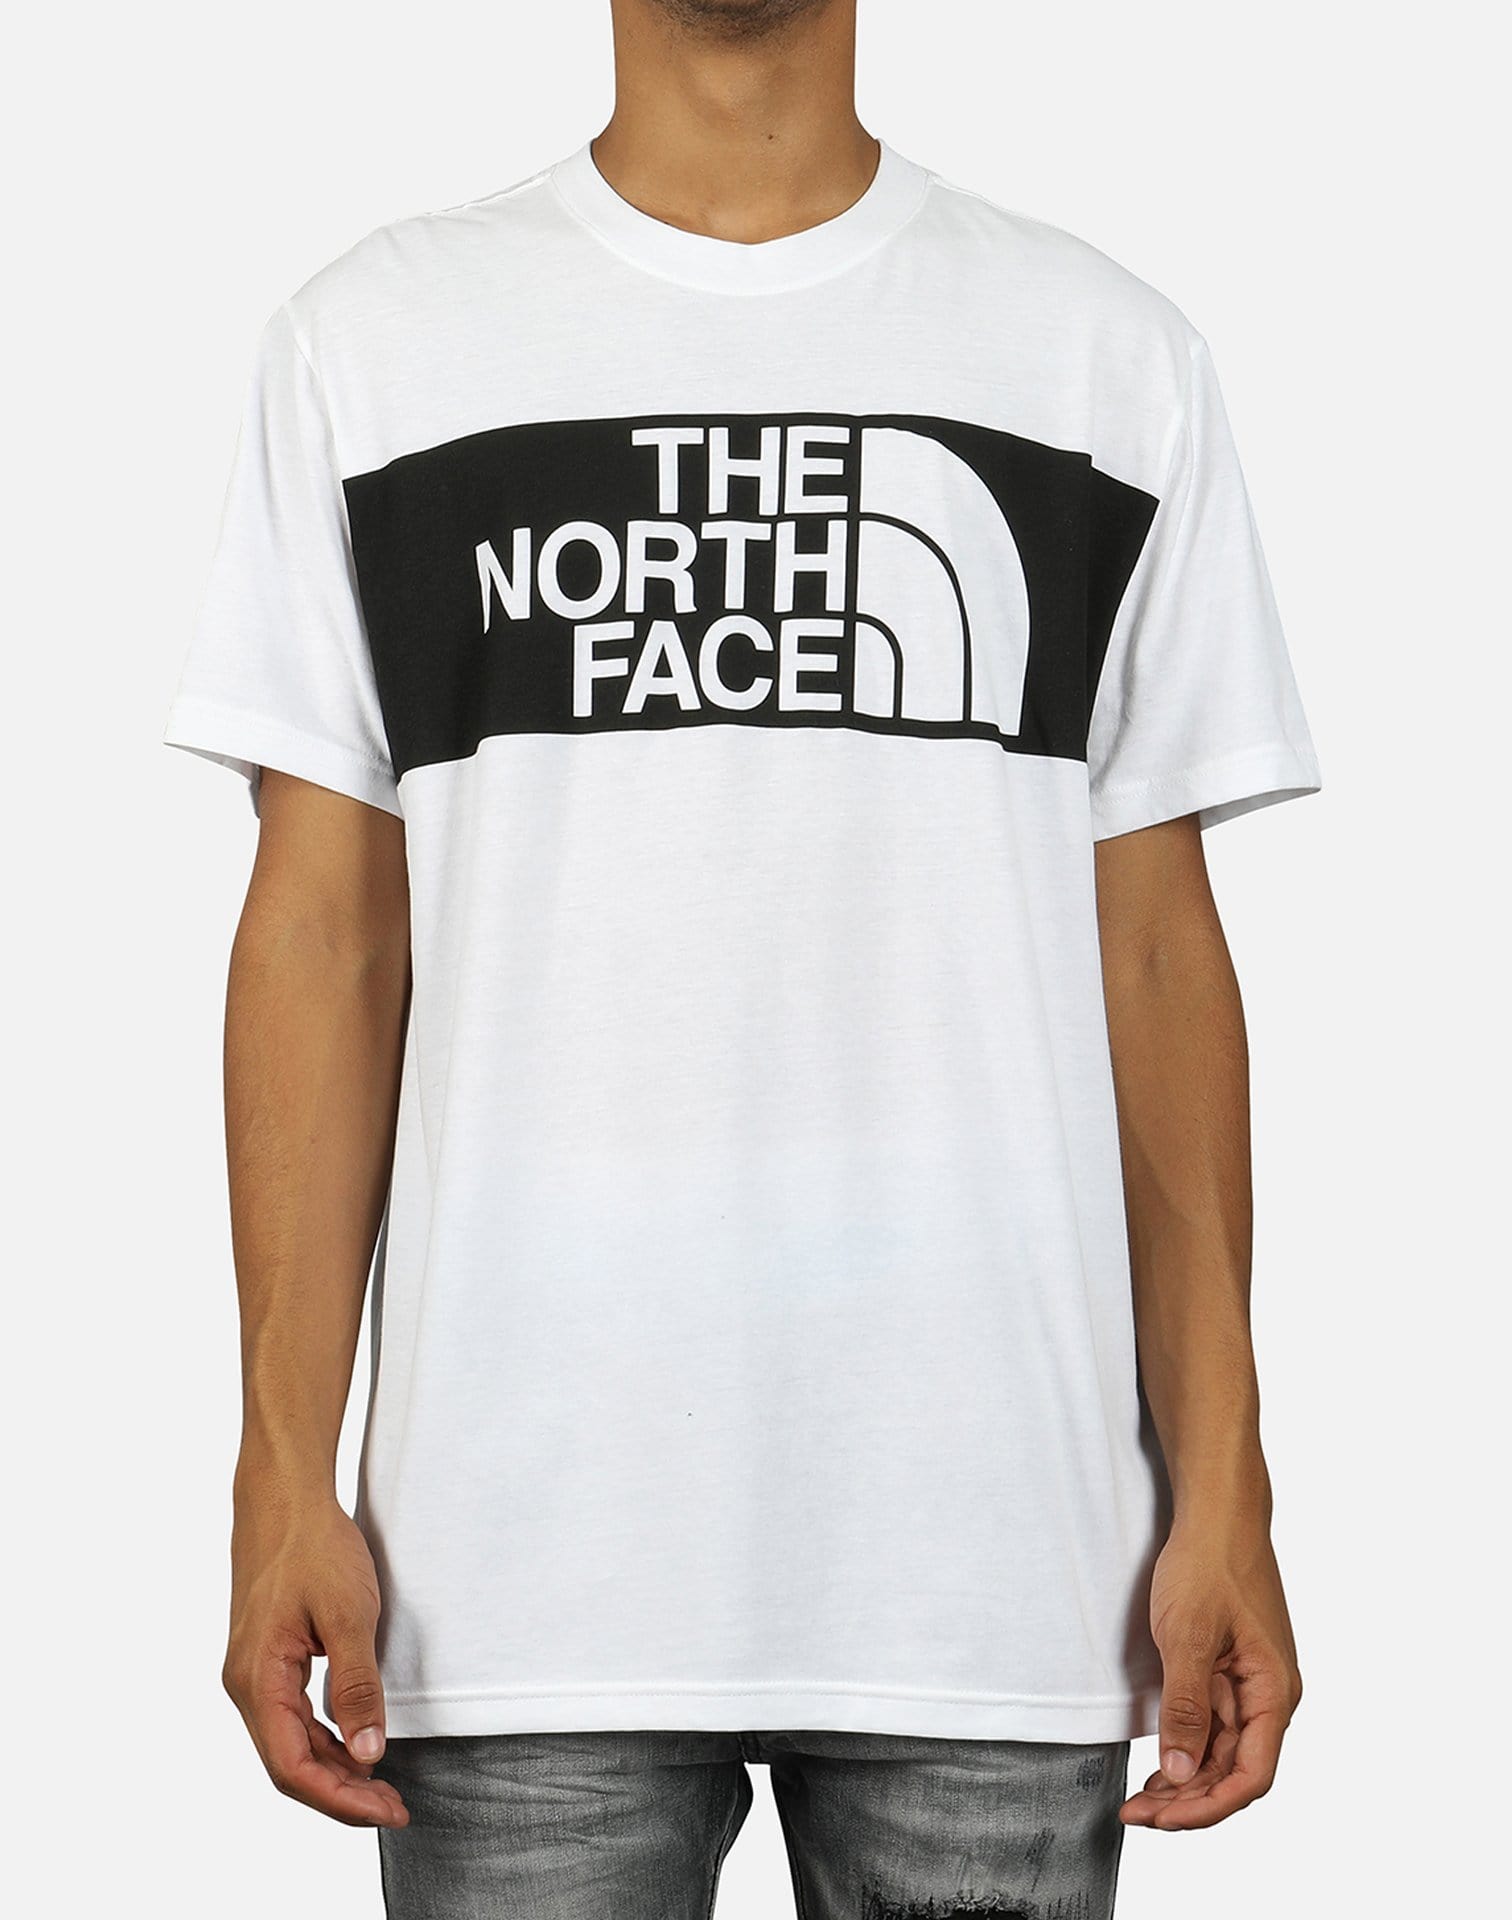 The North Face Men's Edge to Edge Tee